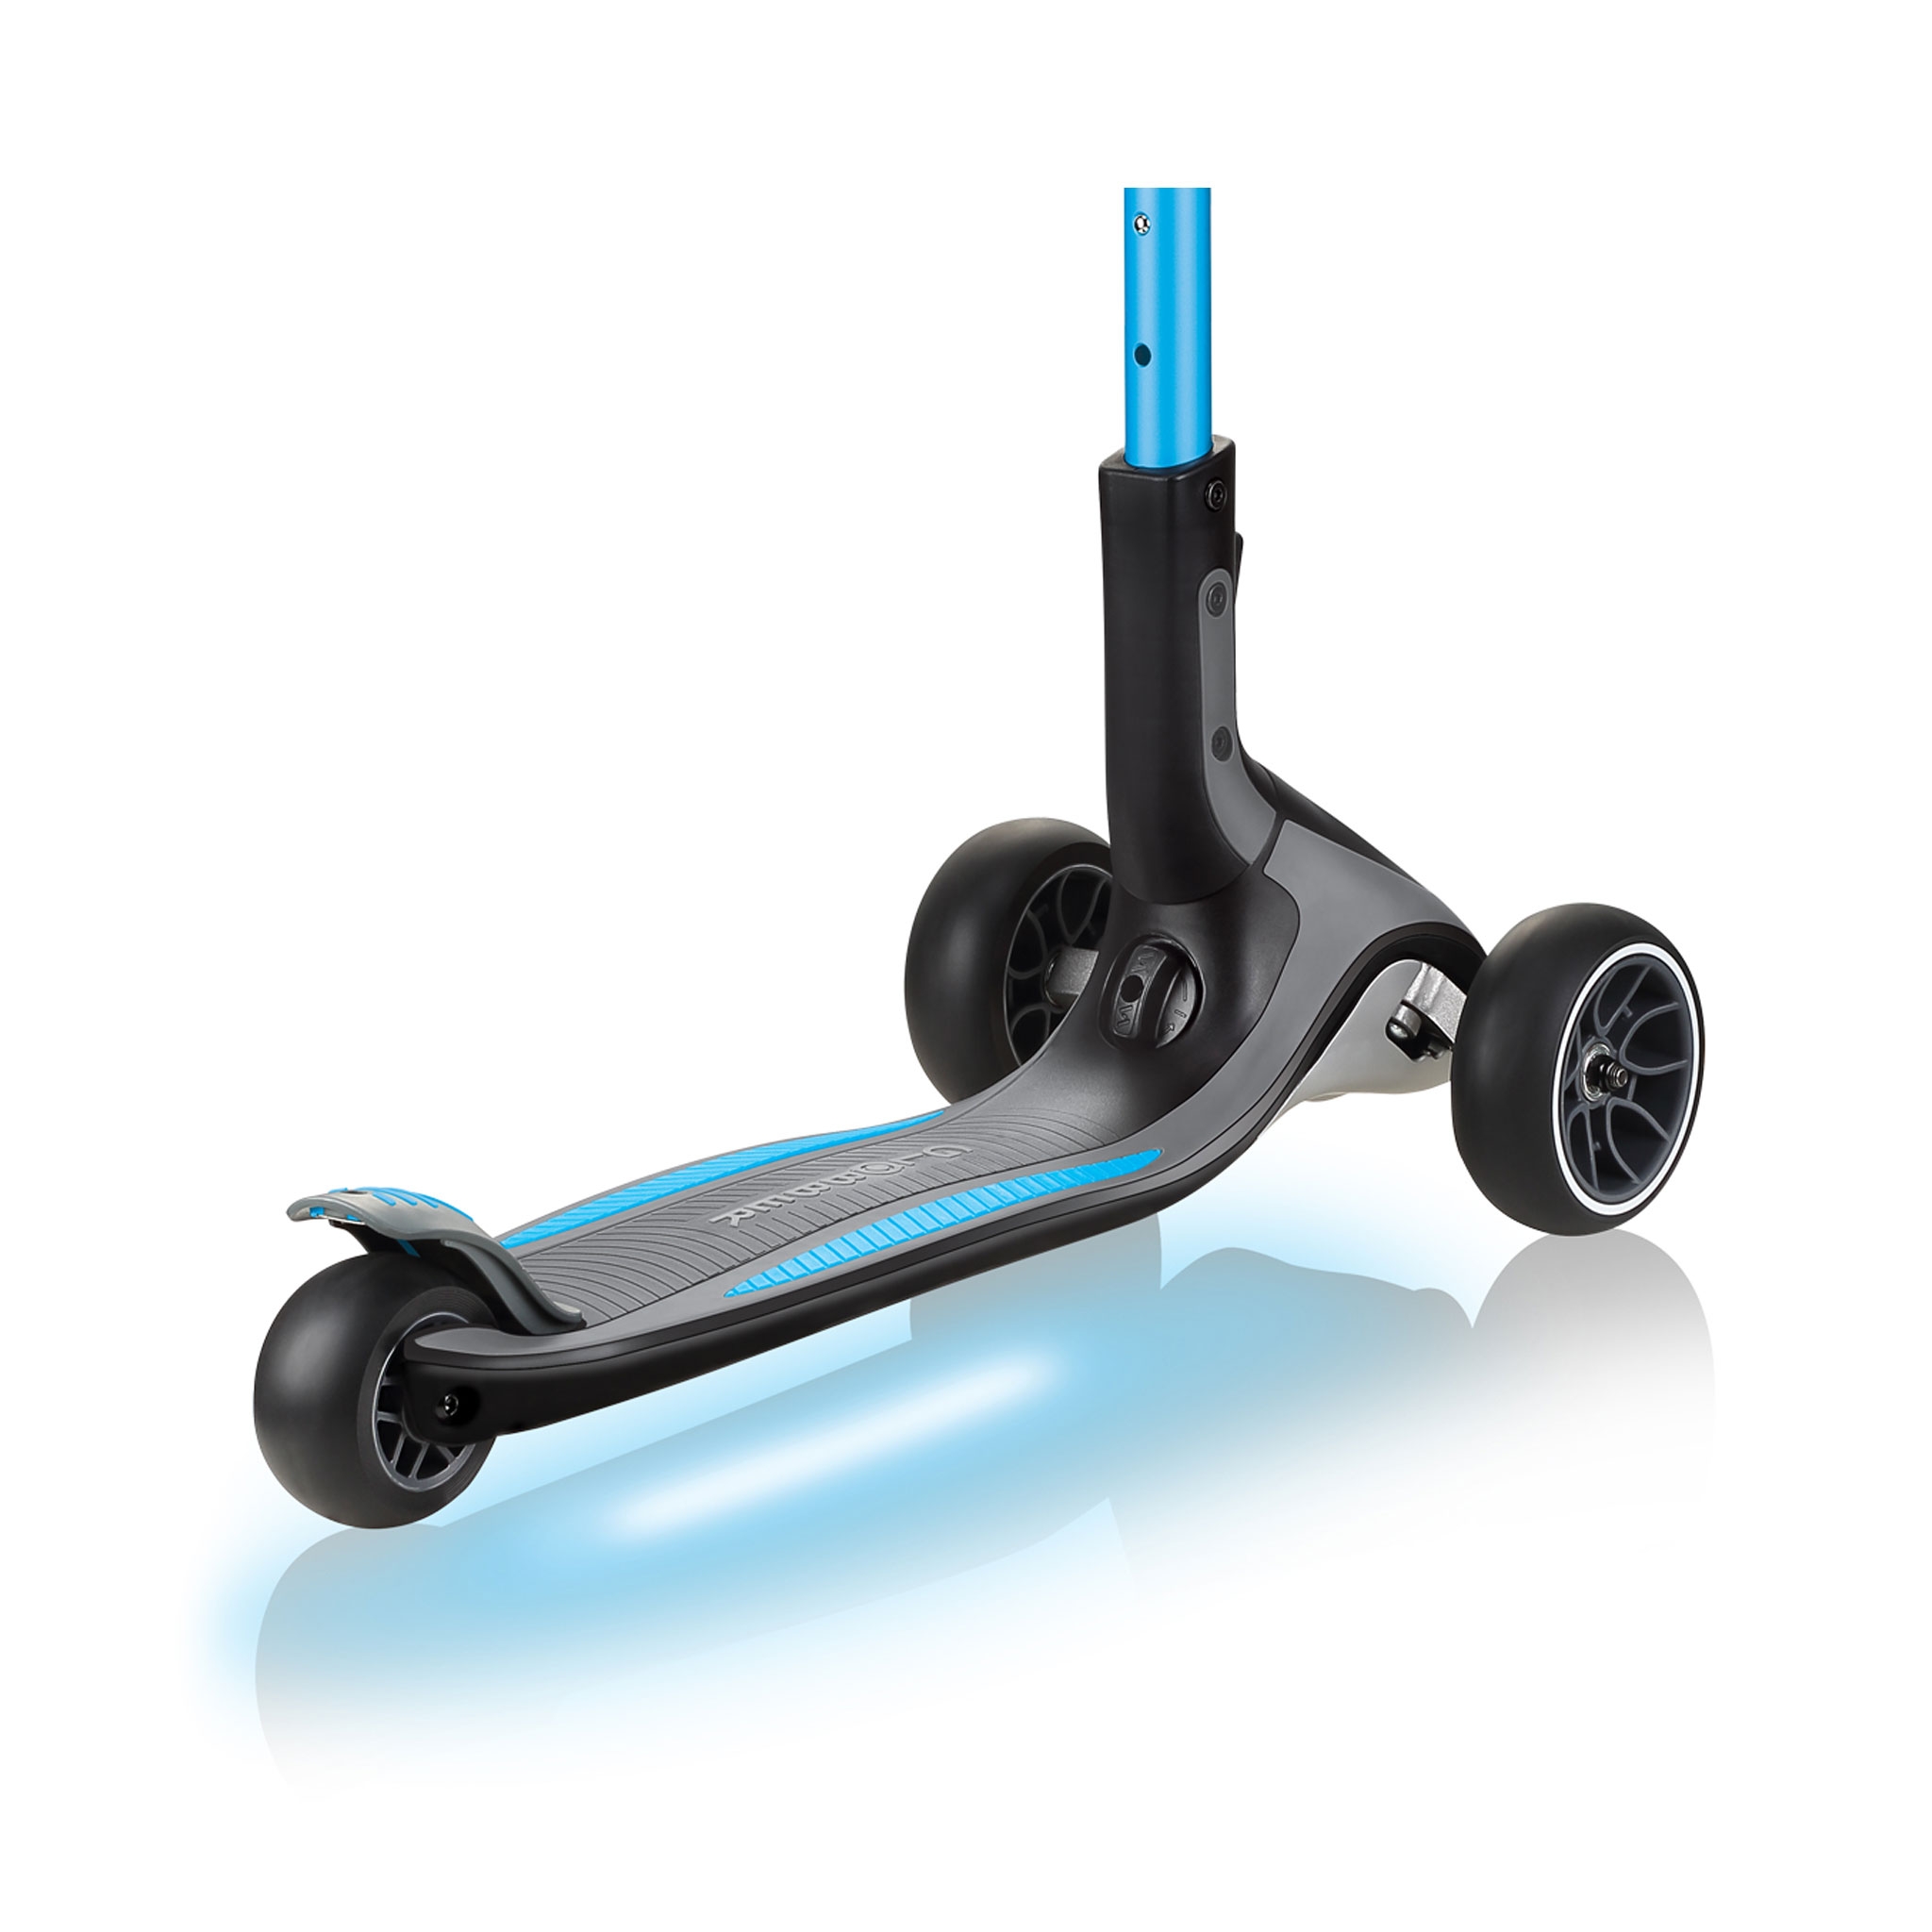 ULTIMUM-LIGHTS-patented-steering-system-on-3-wheel-scooter-for-kids-and-teens-sky-blue 5